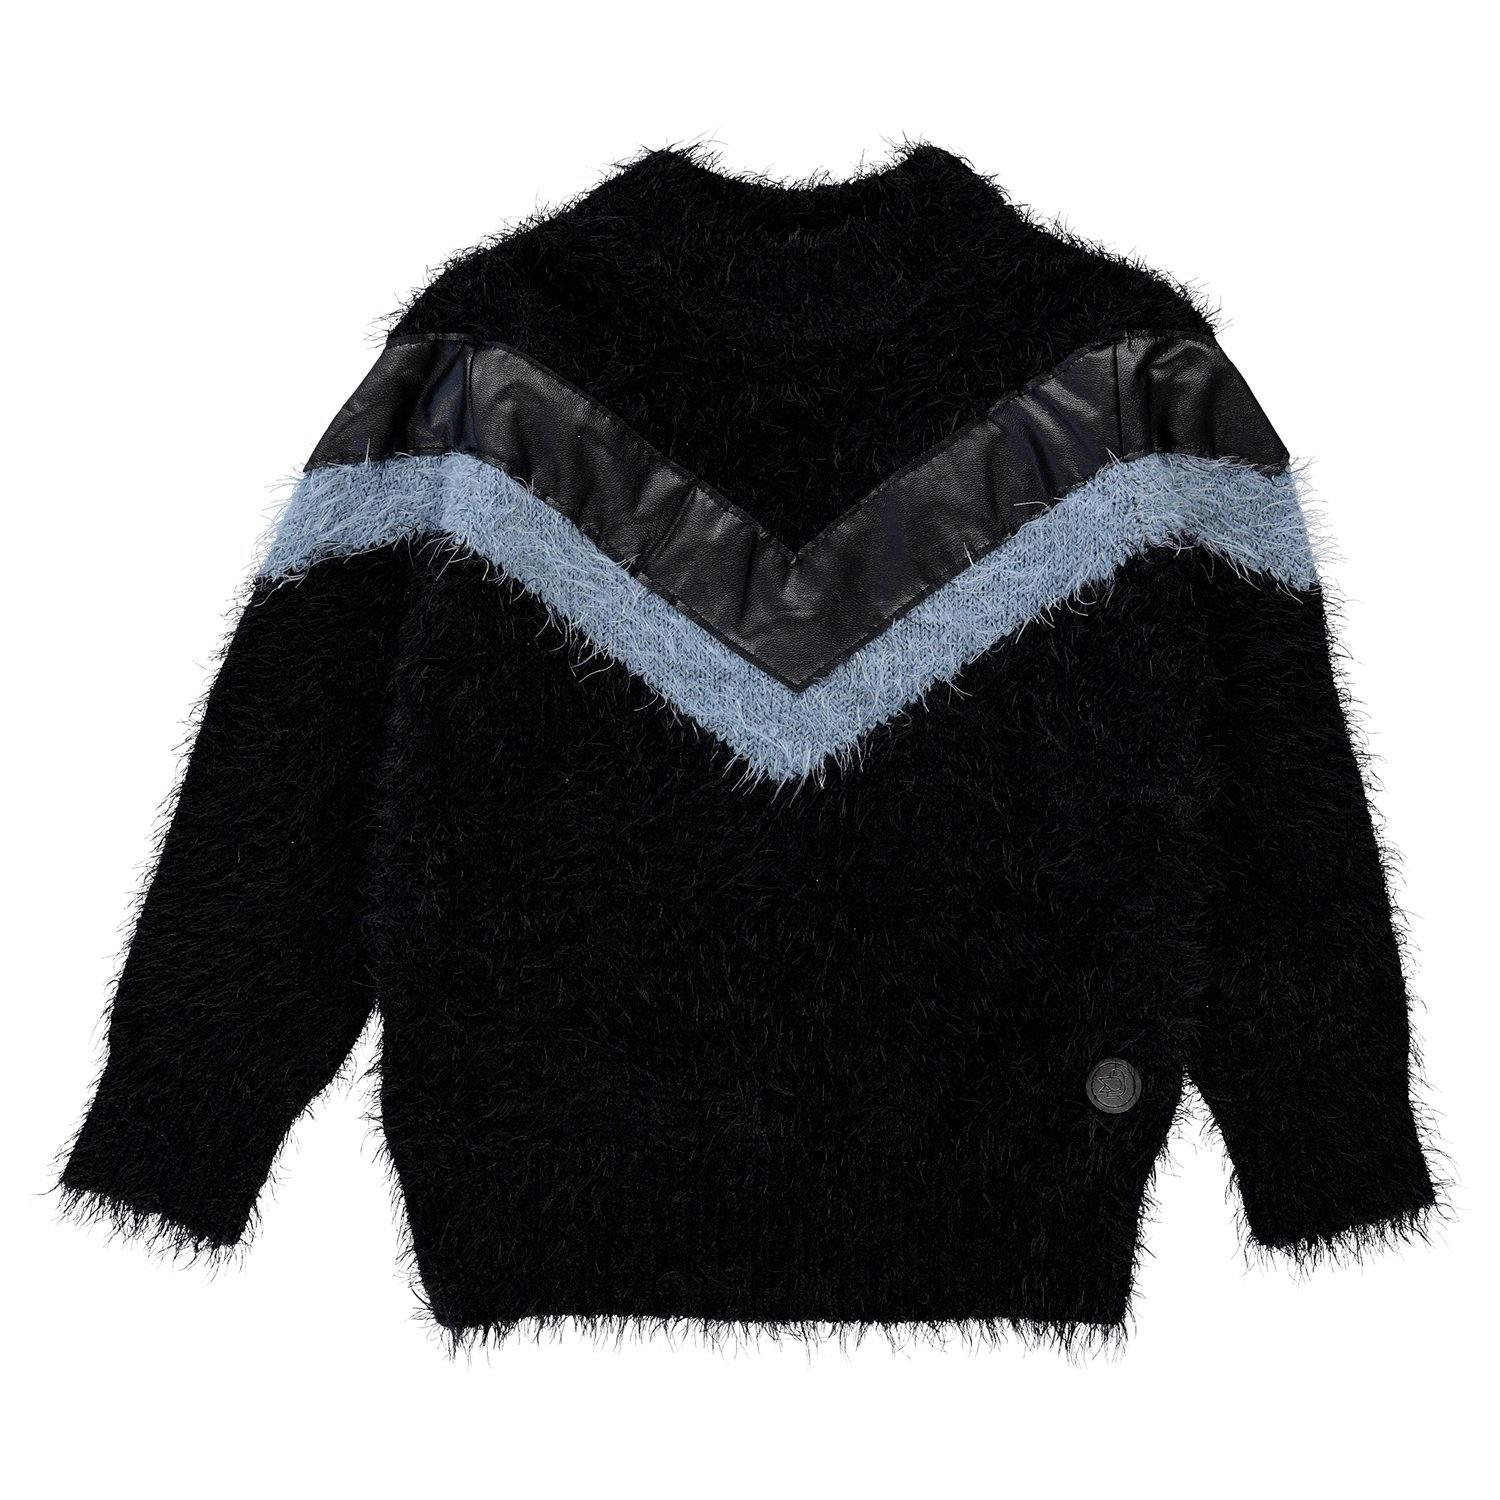 Product image for Retro Fuzzy Knitted Sweater - Kids